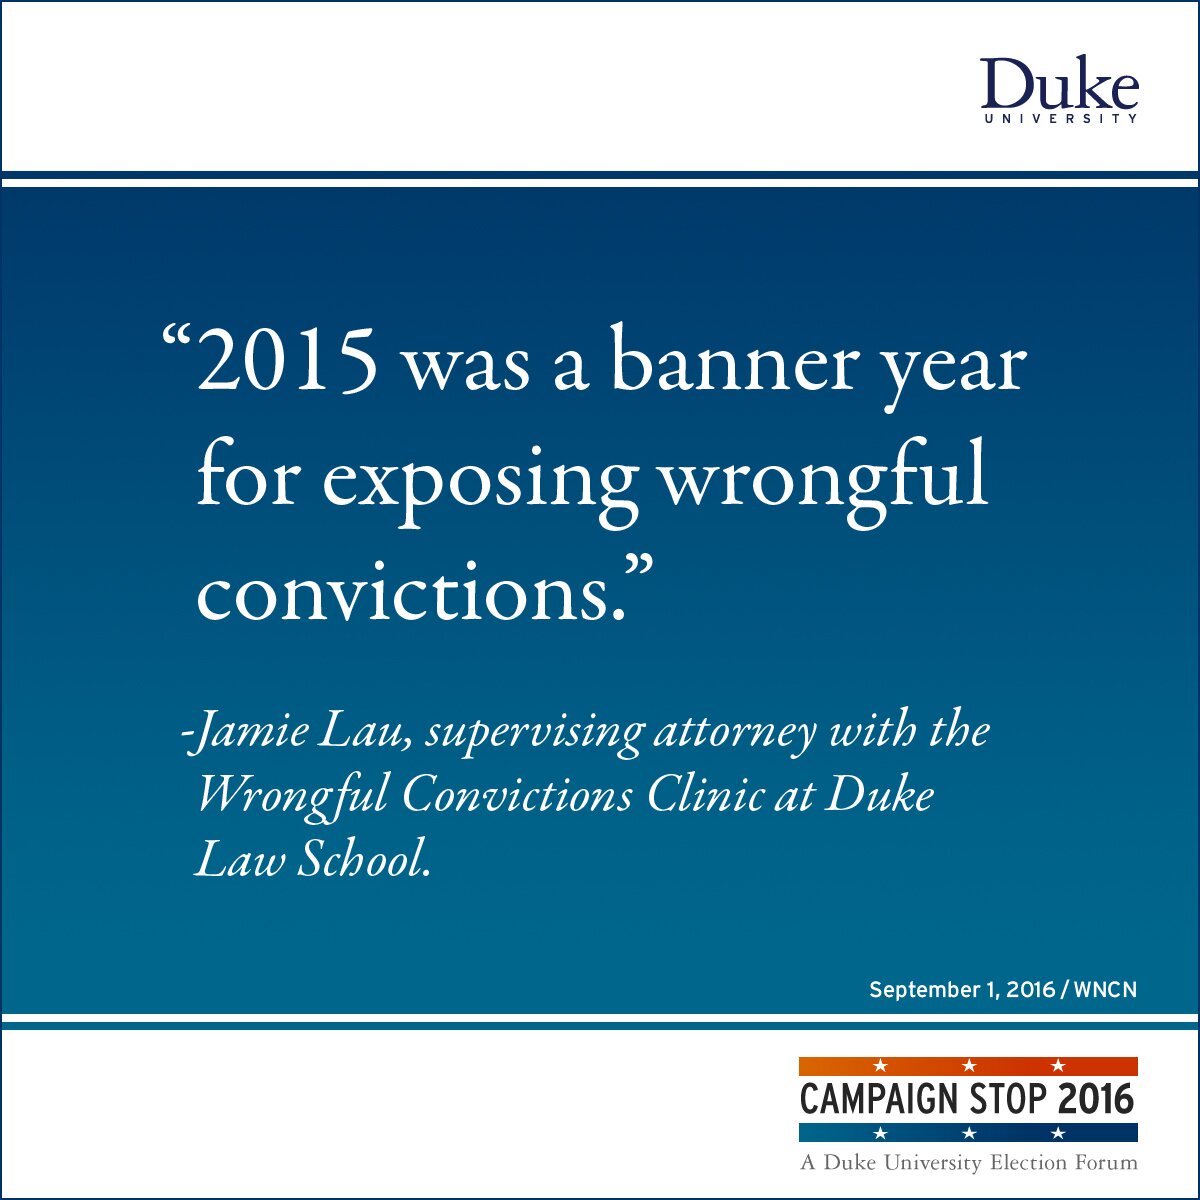 “2015 was a banner year for exposing wrongful convictions.” -Jamie Lau, supervising attorney with the Wrongful Convictions Clinic at Duke Law School.